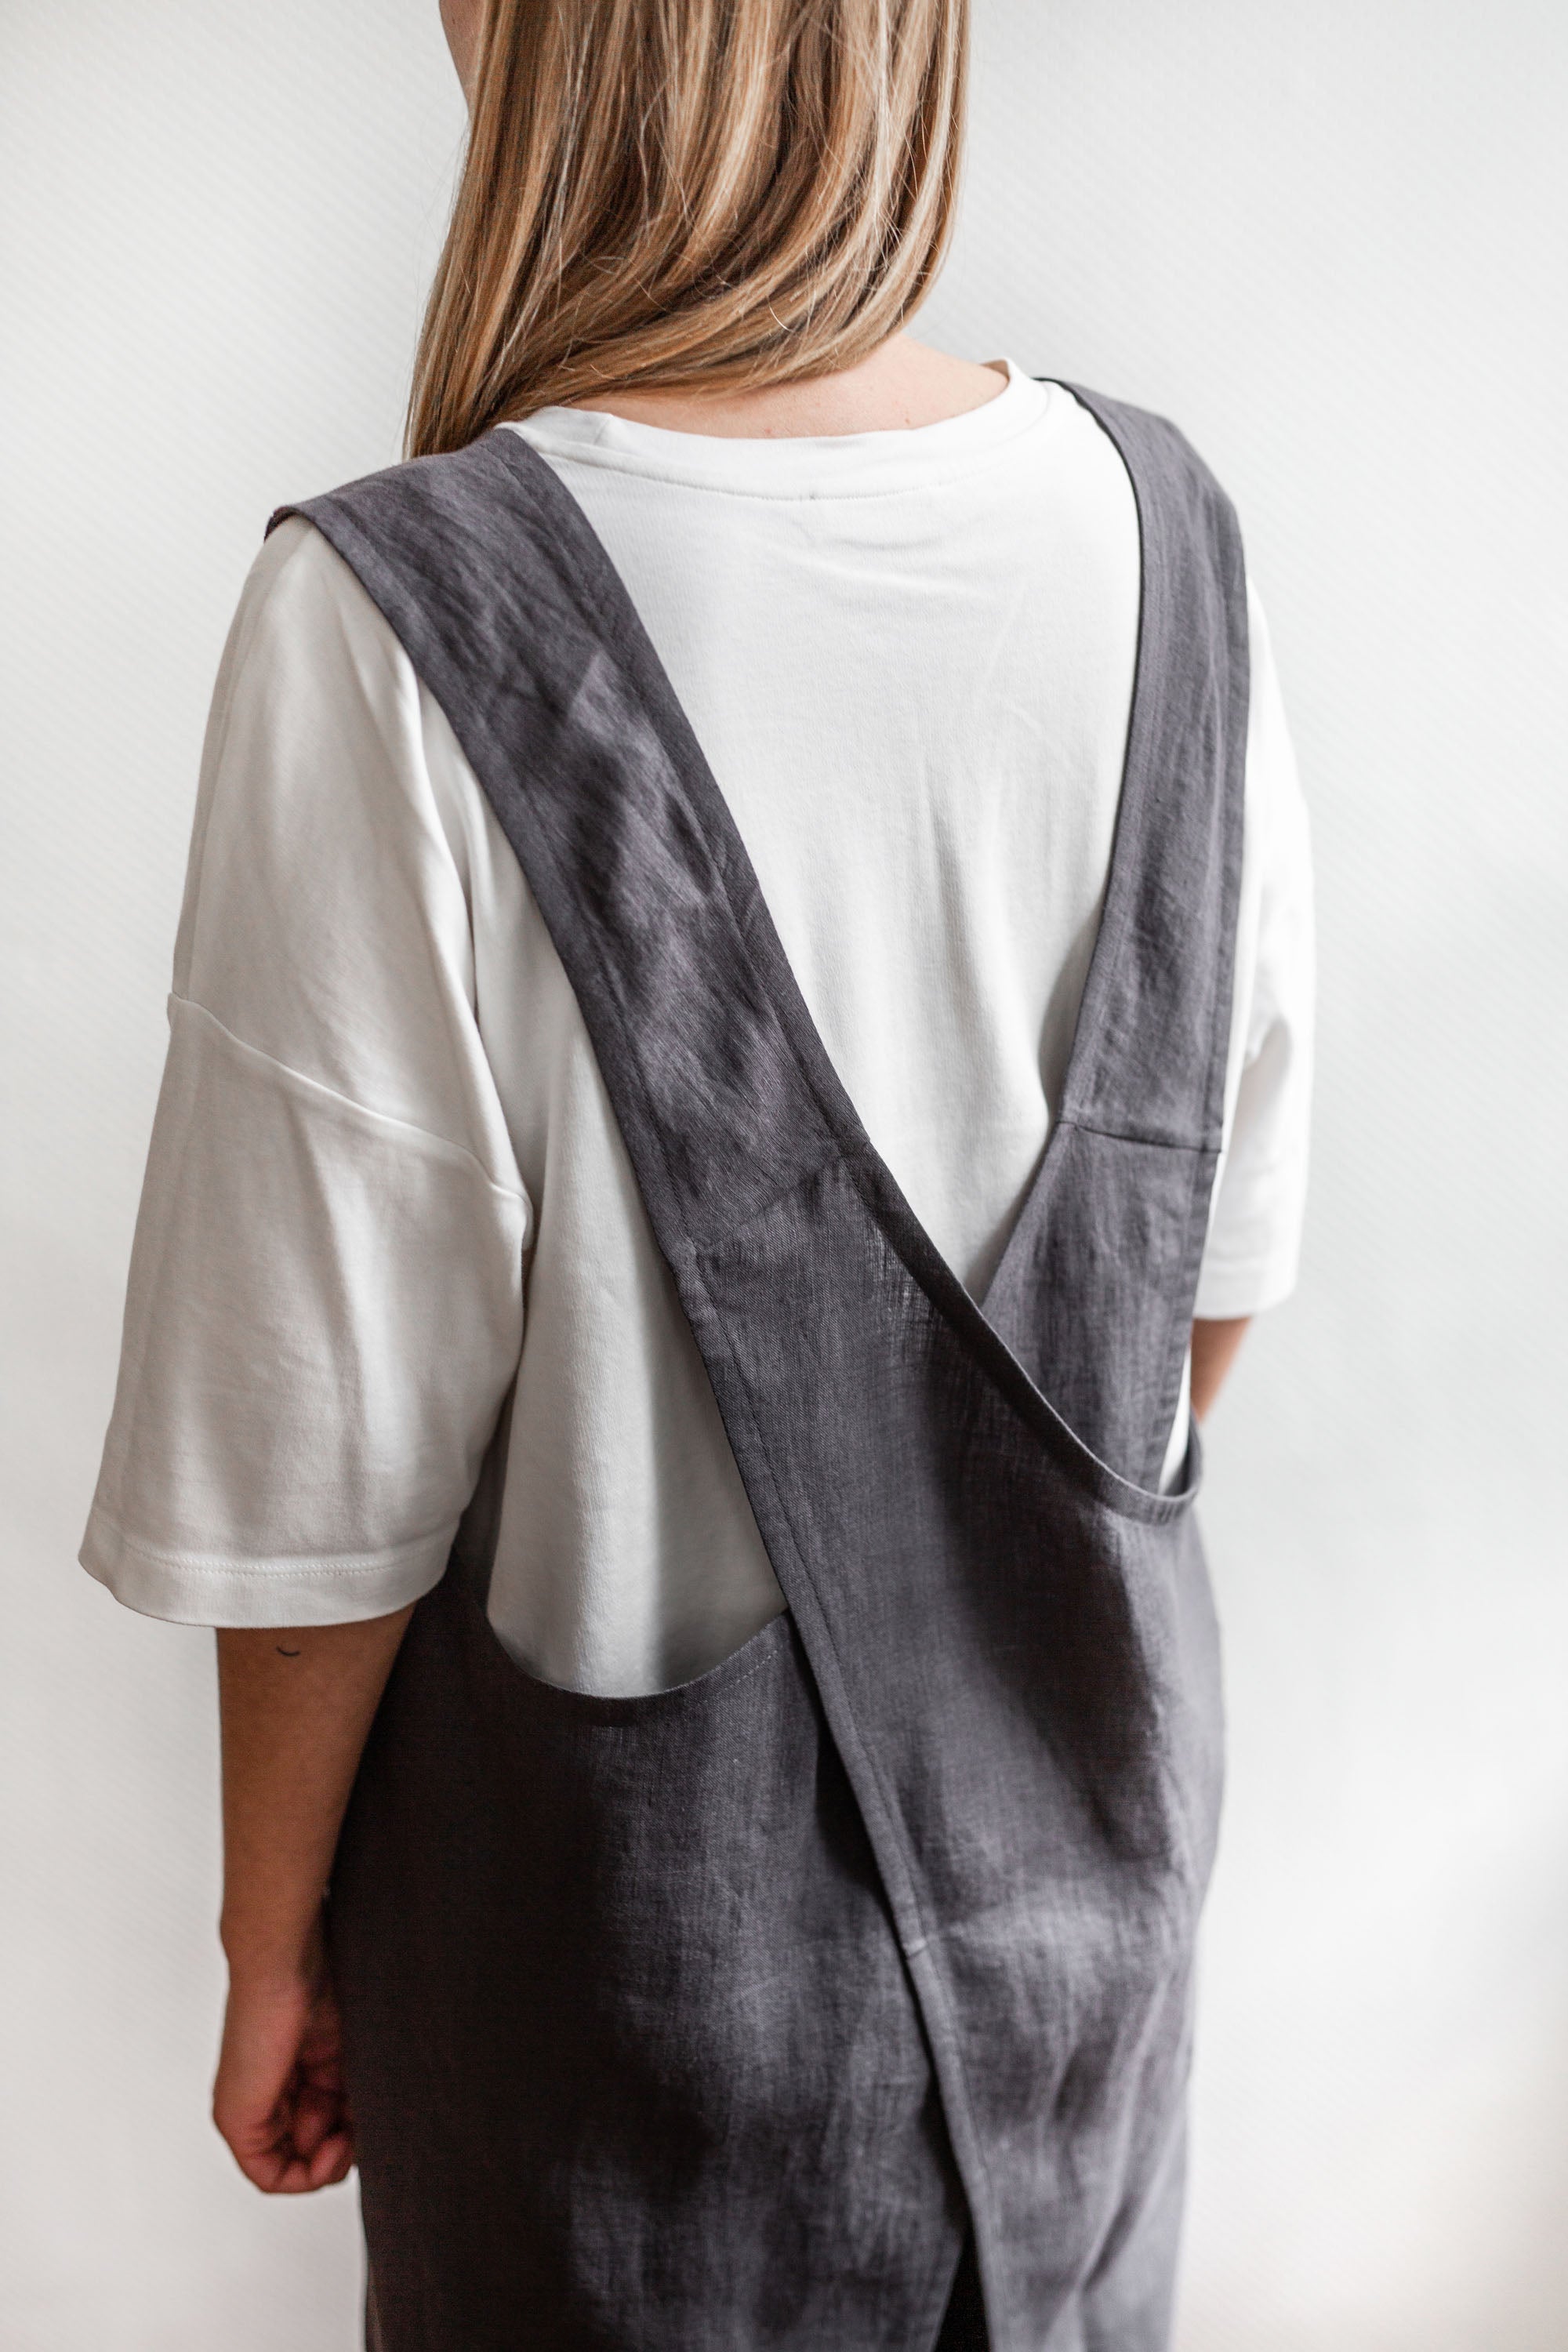 Back Of Pinafore Linen Apron In Charcoal By AmourlInen